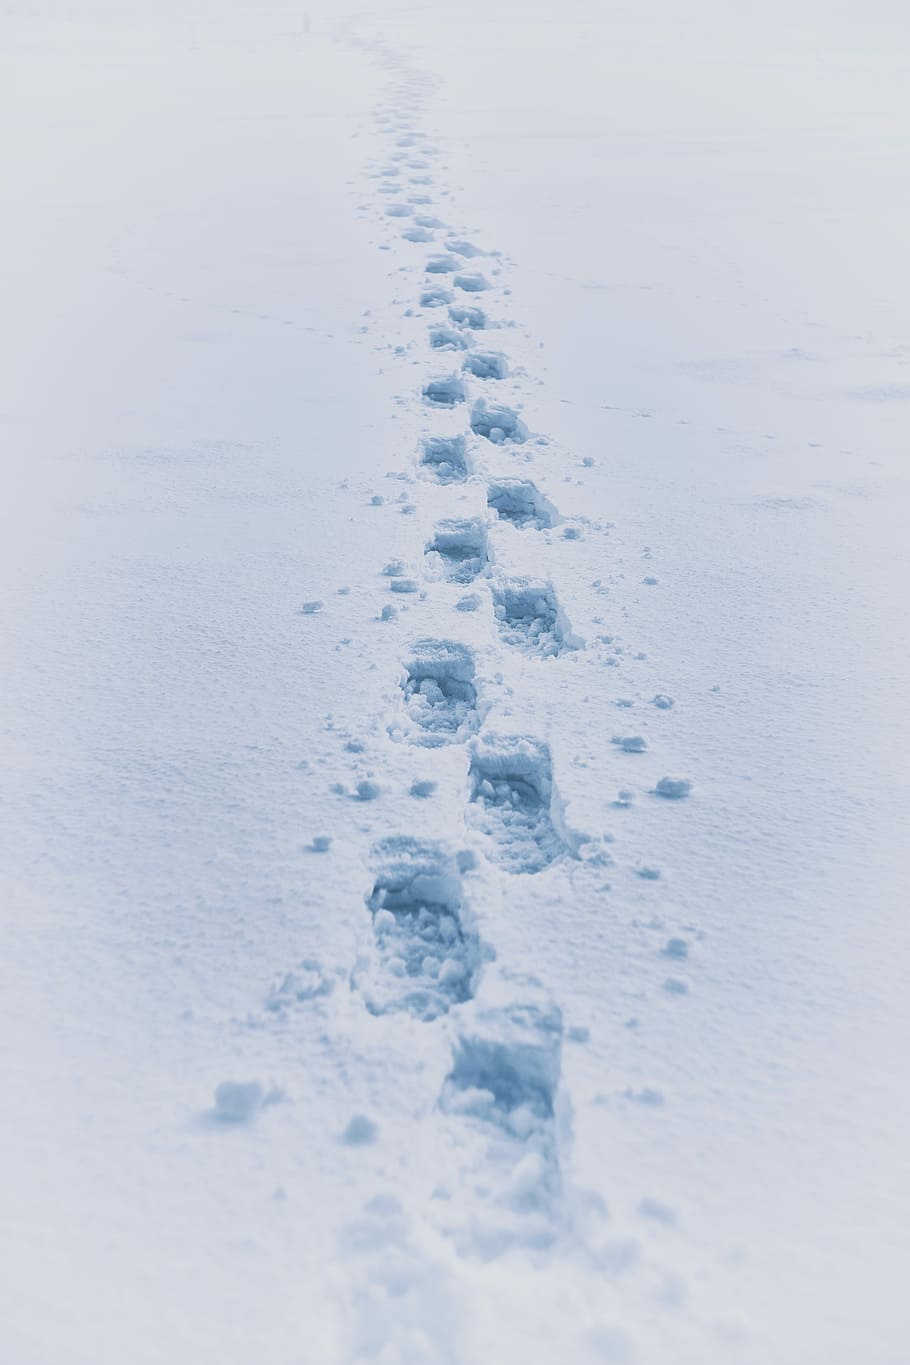 Footprint In Snow, Footsteps On Snow, Boot, Impression, - Footprints In The Snow Hd - HD Wallpaper 